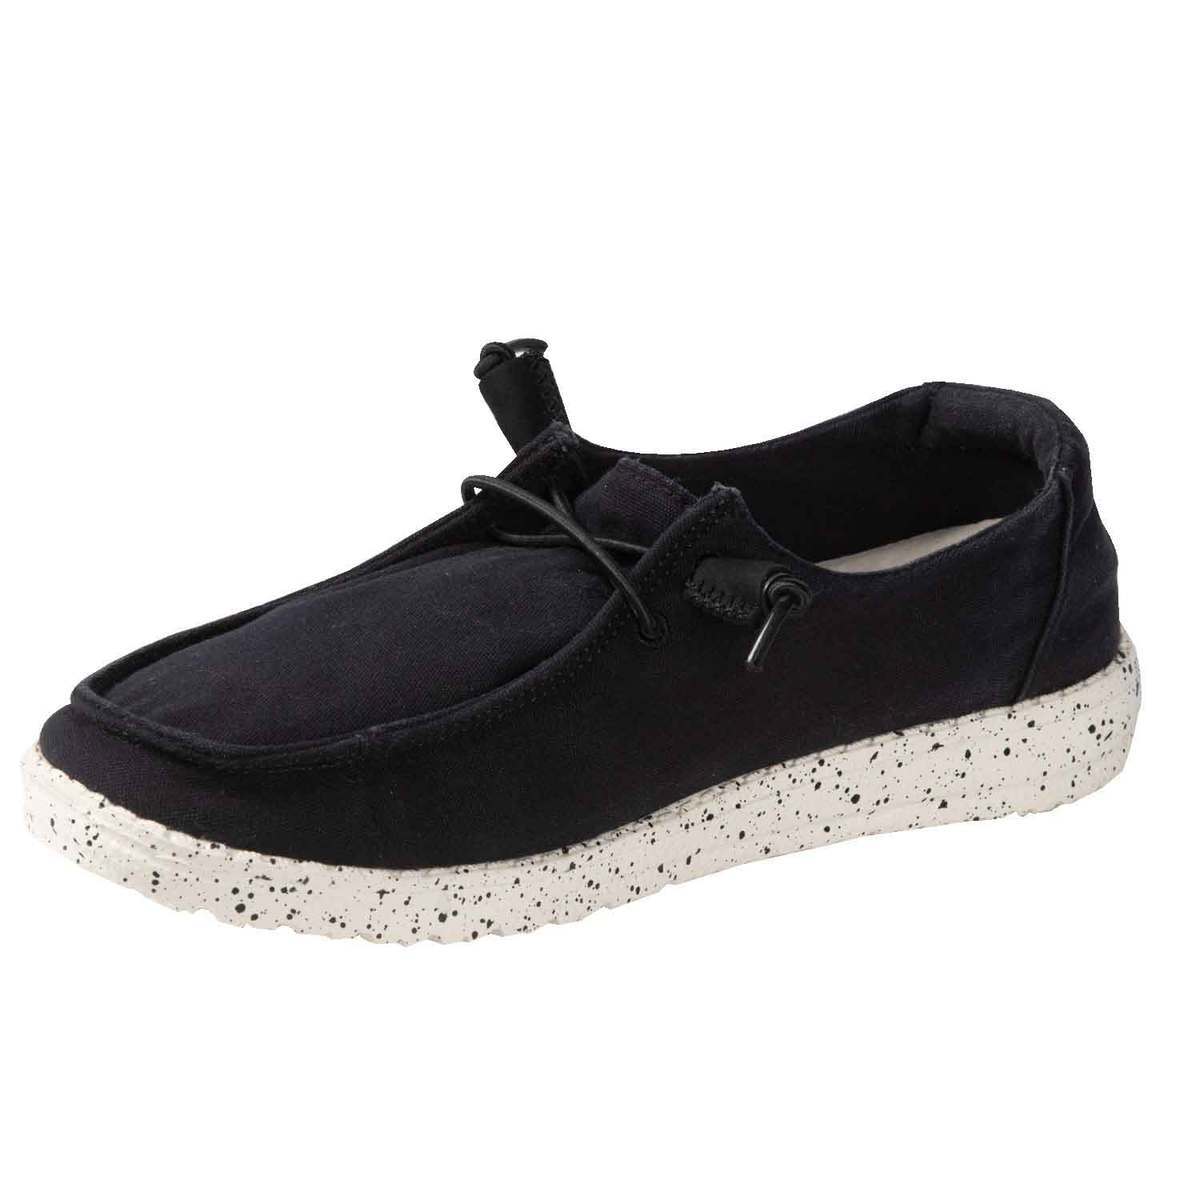 Hey Dude Women's Wendy Casual Shoes - Black - Size 7 - Black 7 ...